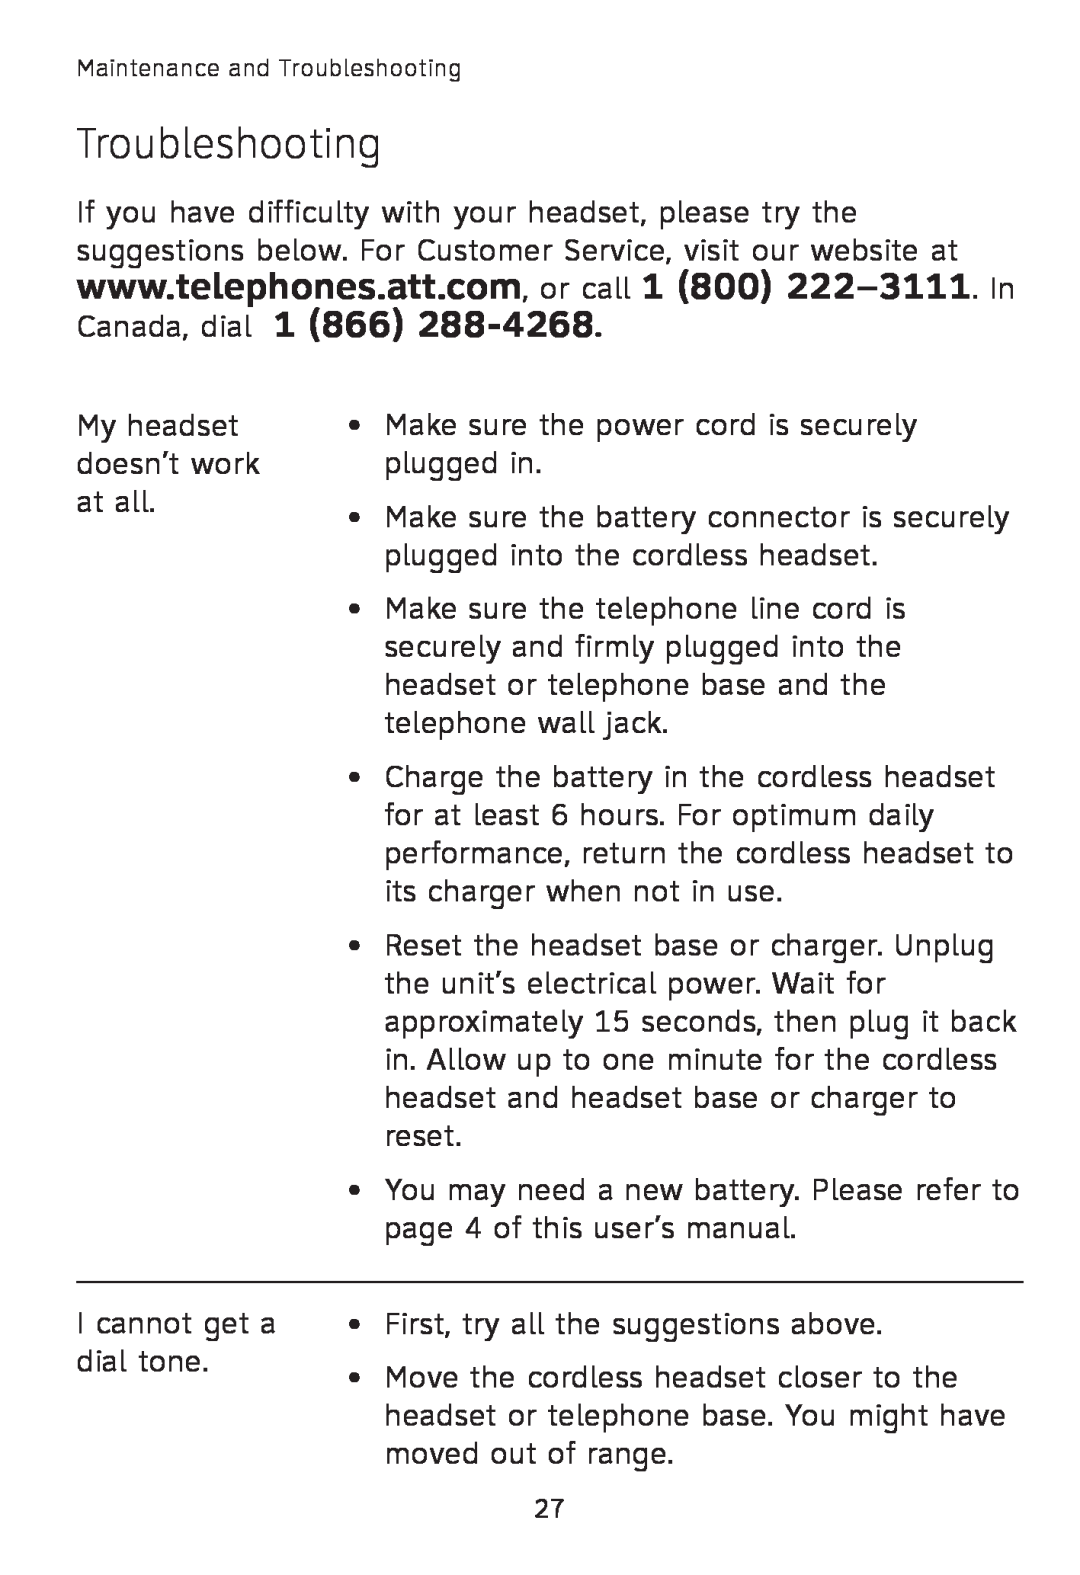 AT&T TL7600 user manual Troubleshooting 